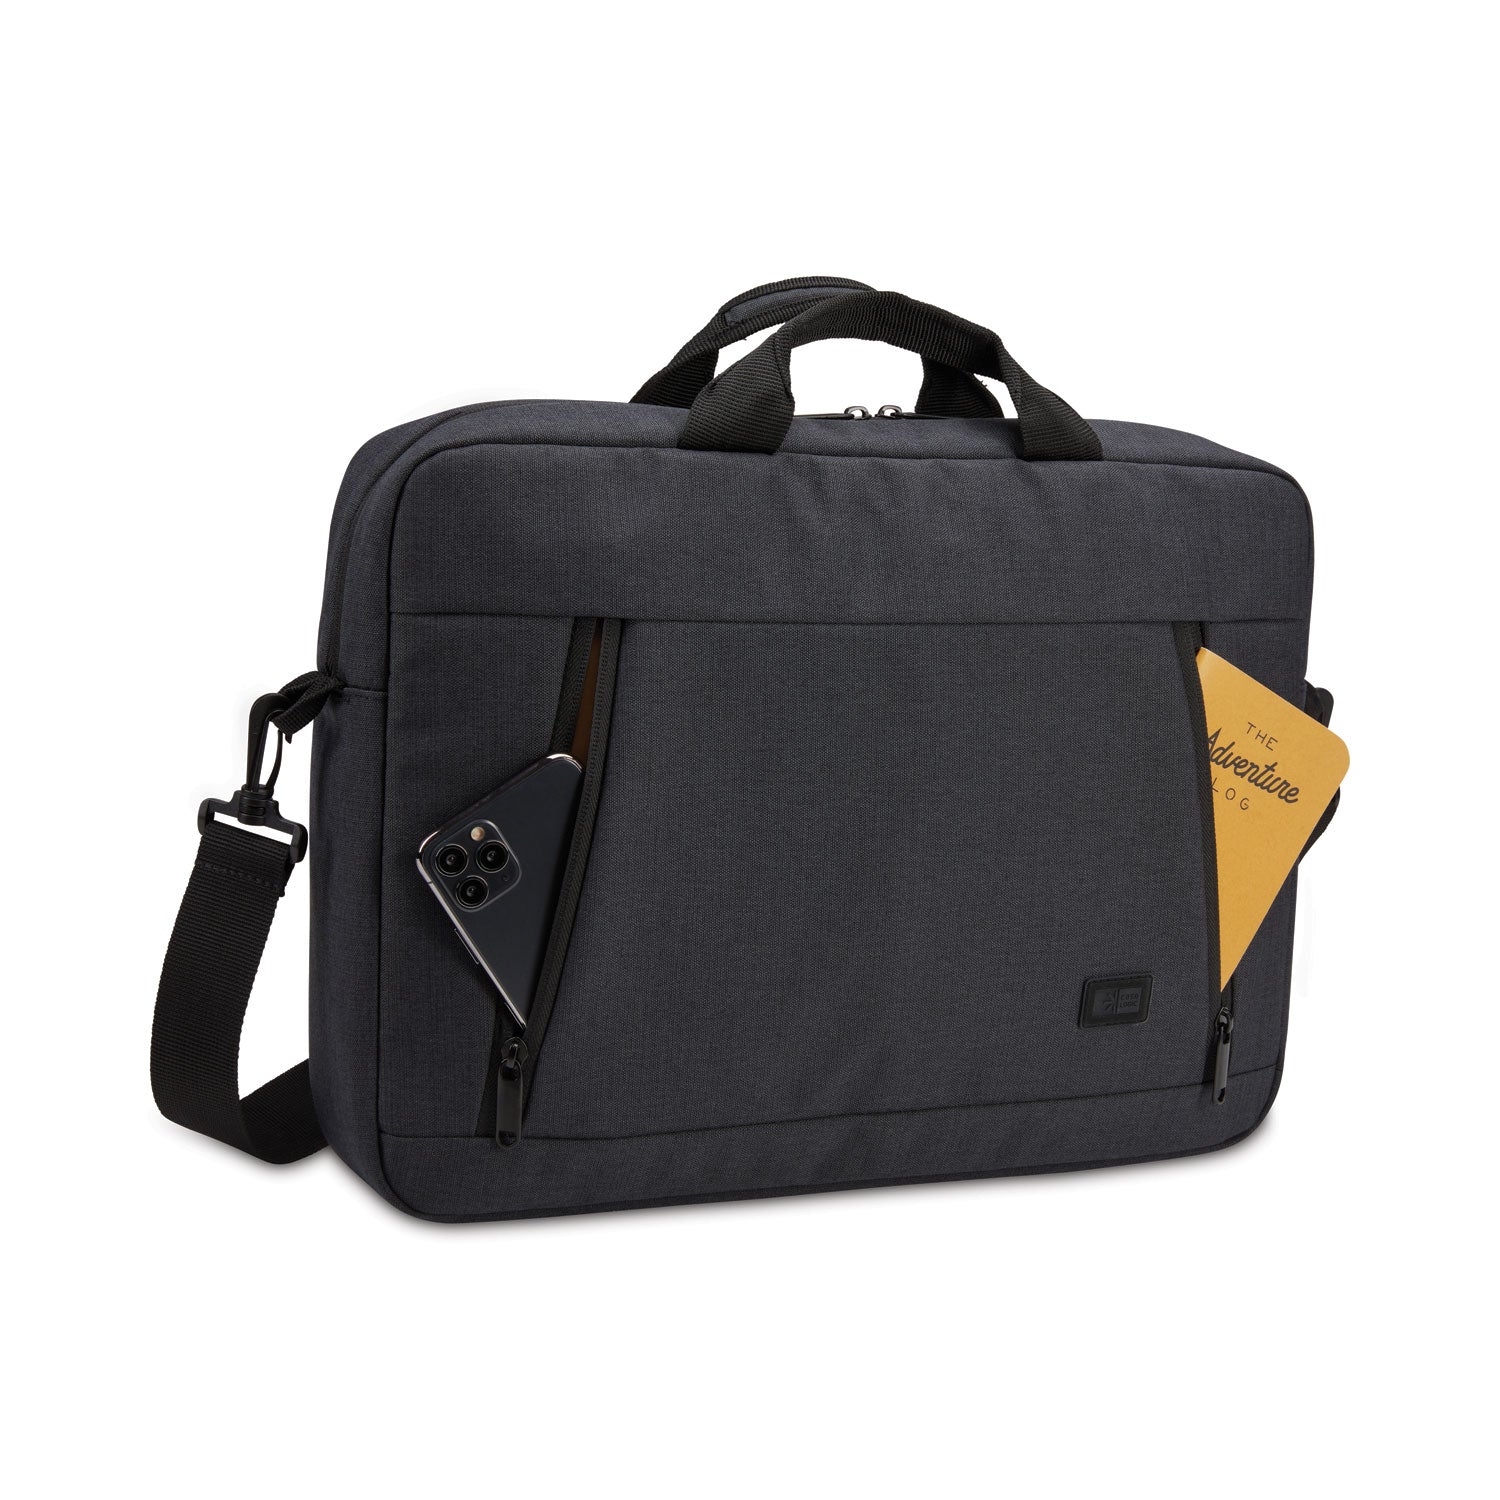 huxton-156-laptop-attache-fits-devices-up-to-156-polyester-163-x-28-x-124-black_clg3204653 - 2